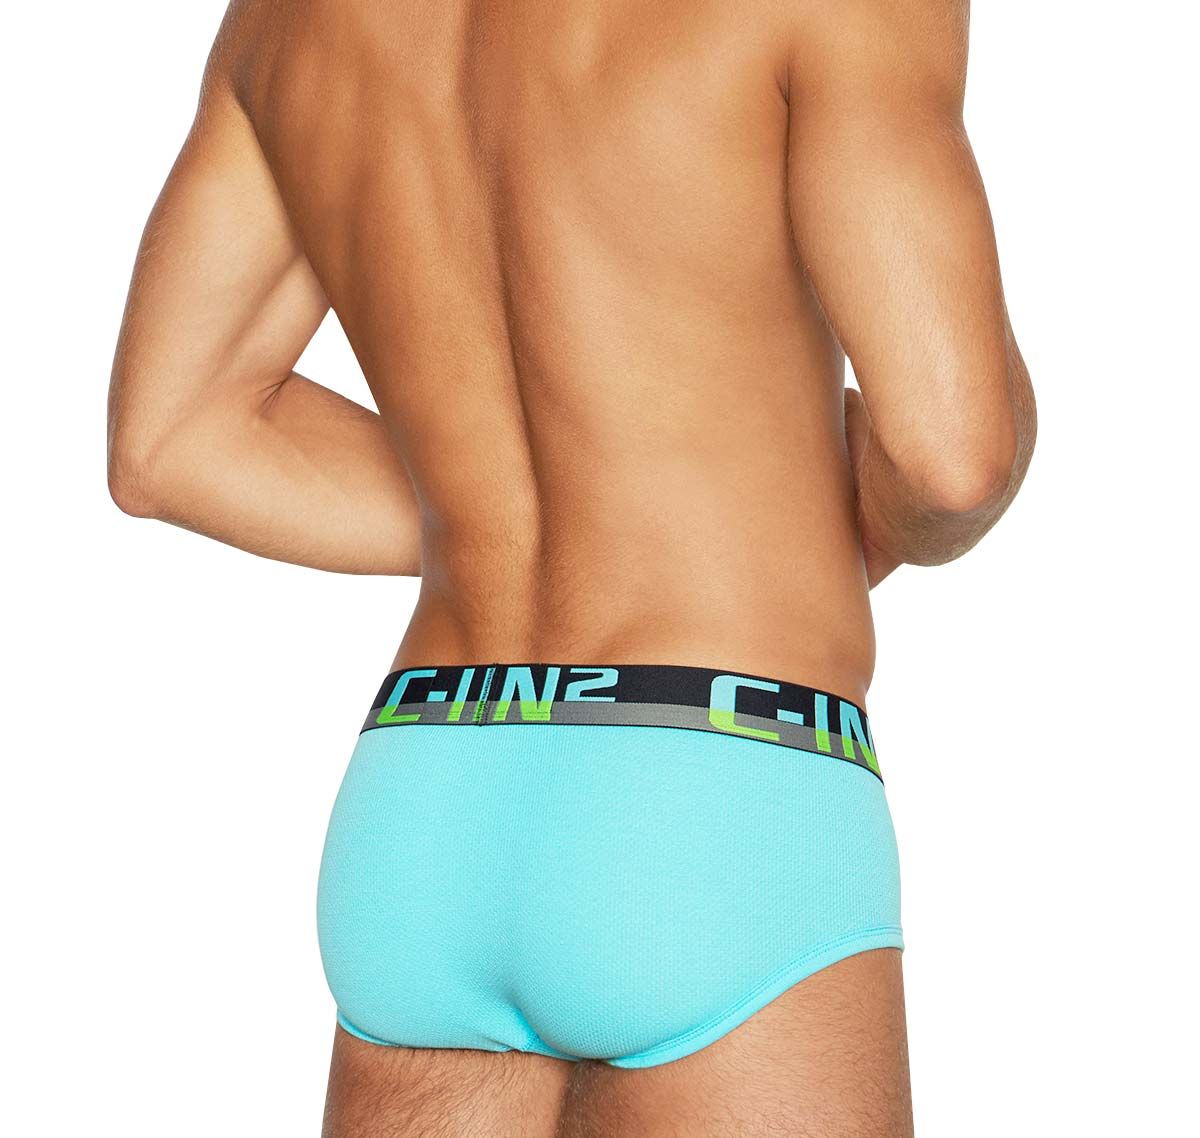 C-IN2 Slip C-Theory PUNT BRIEF 8064-400A, turquoise